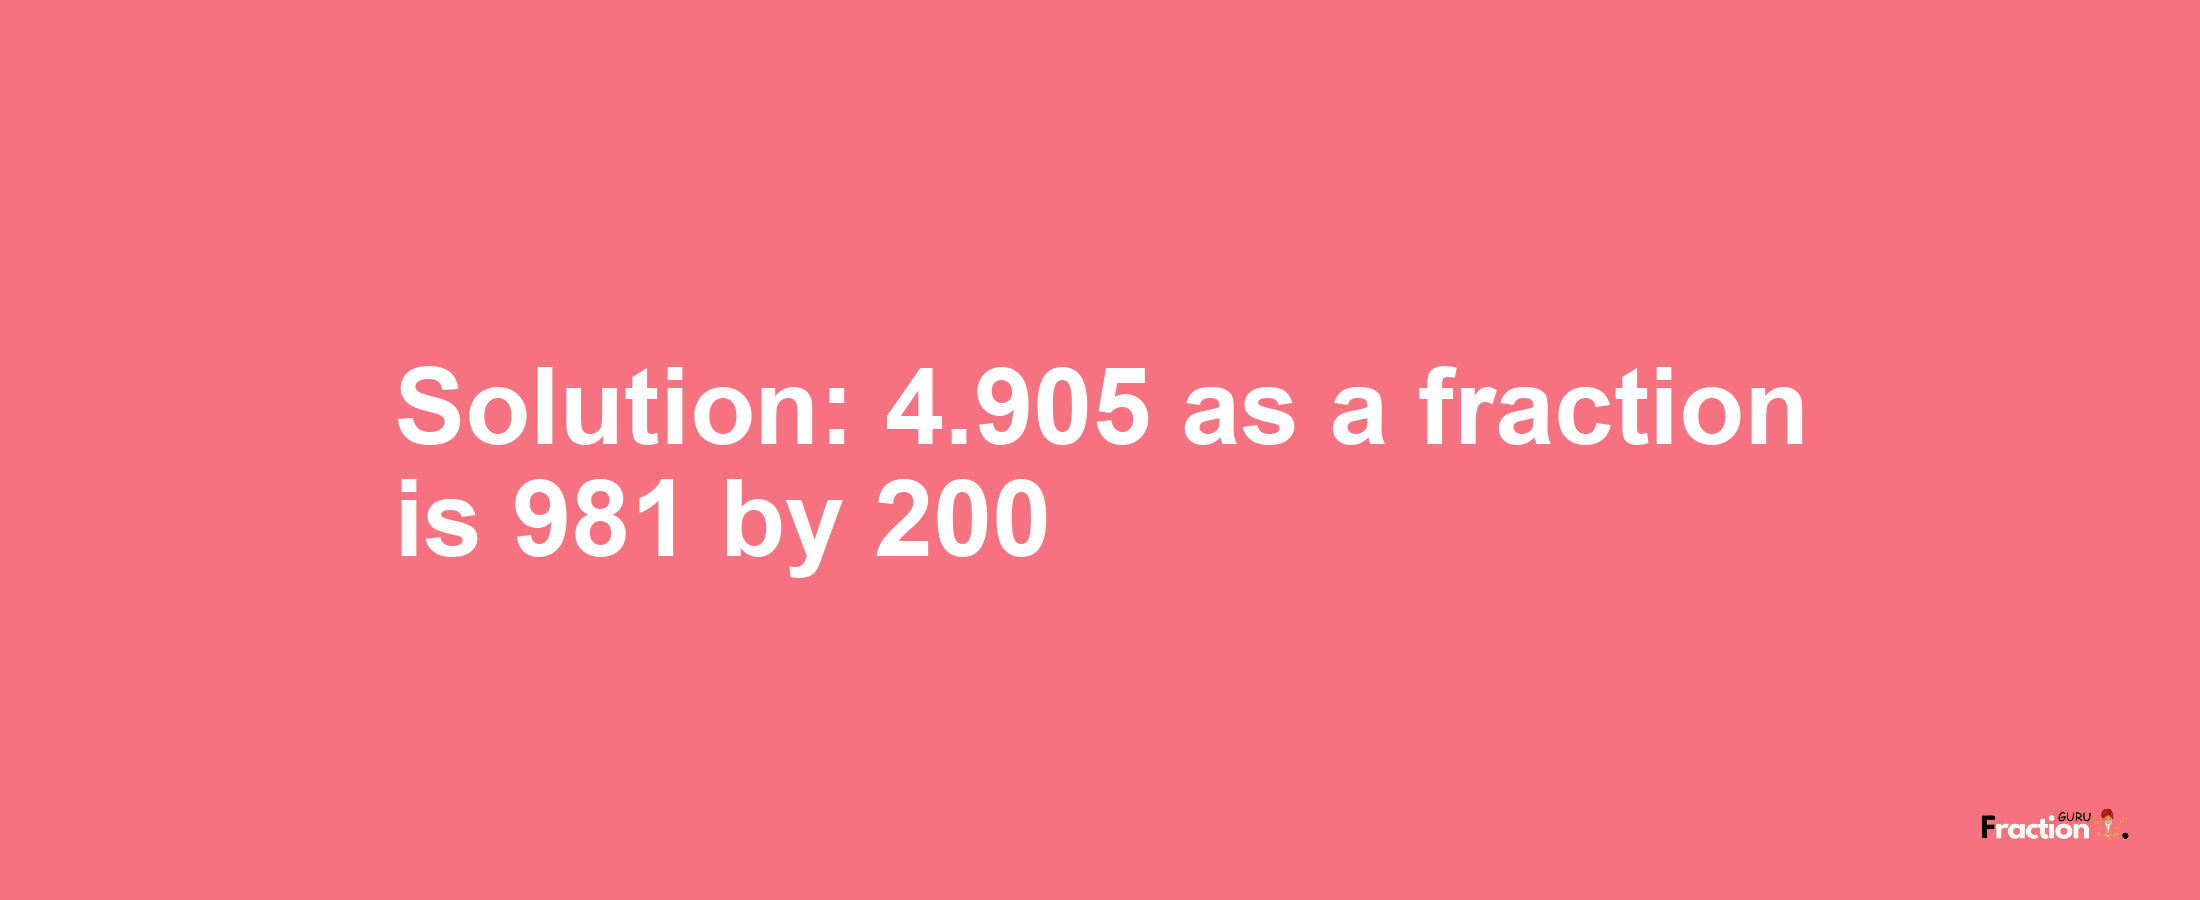 Solution:4.905 as a fraction is 981/200